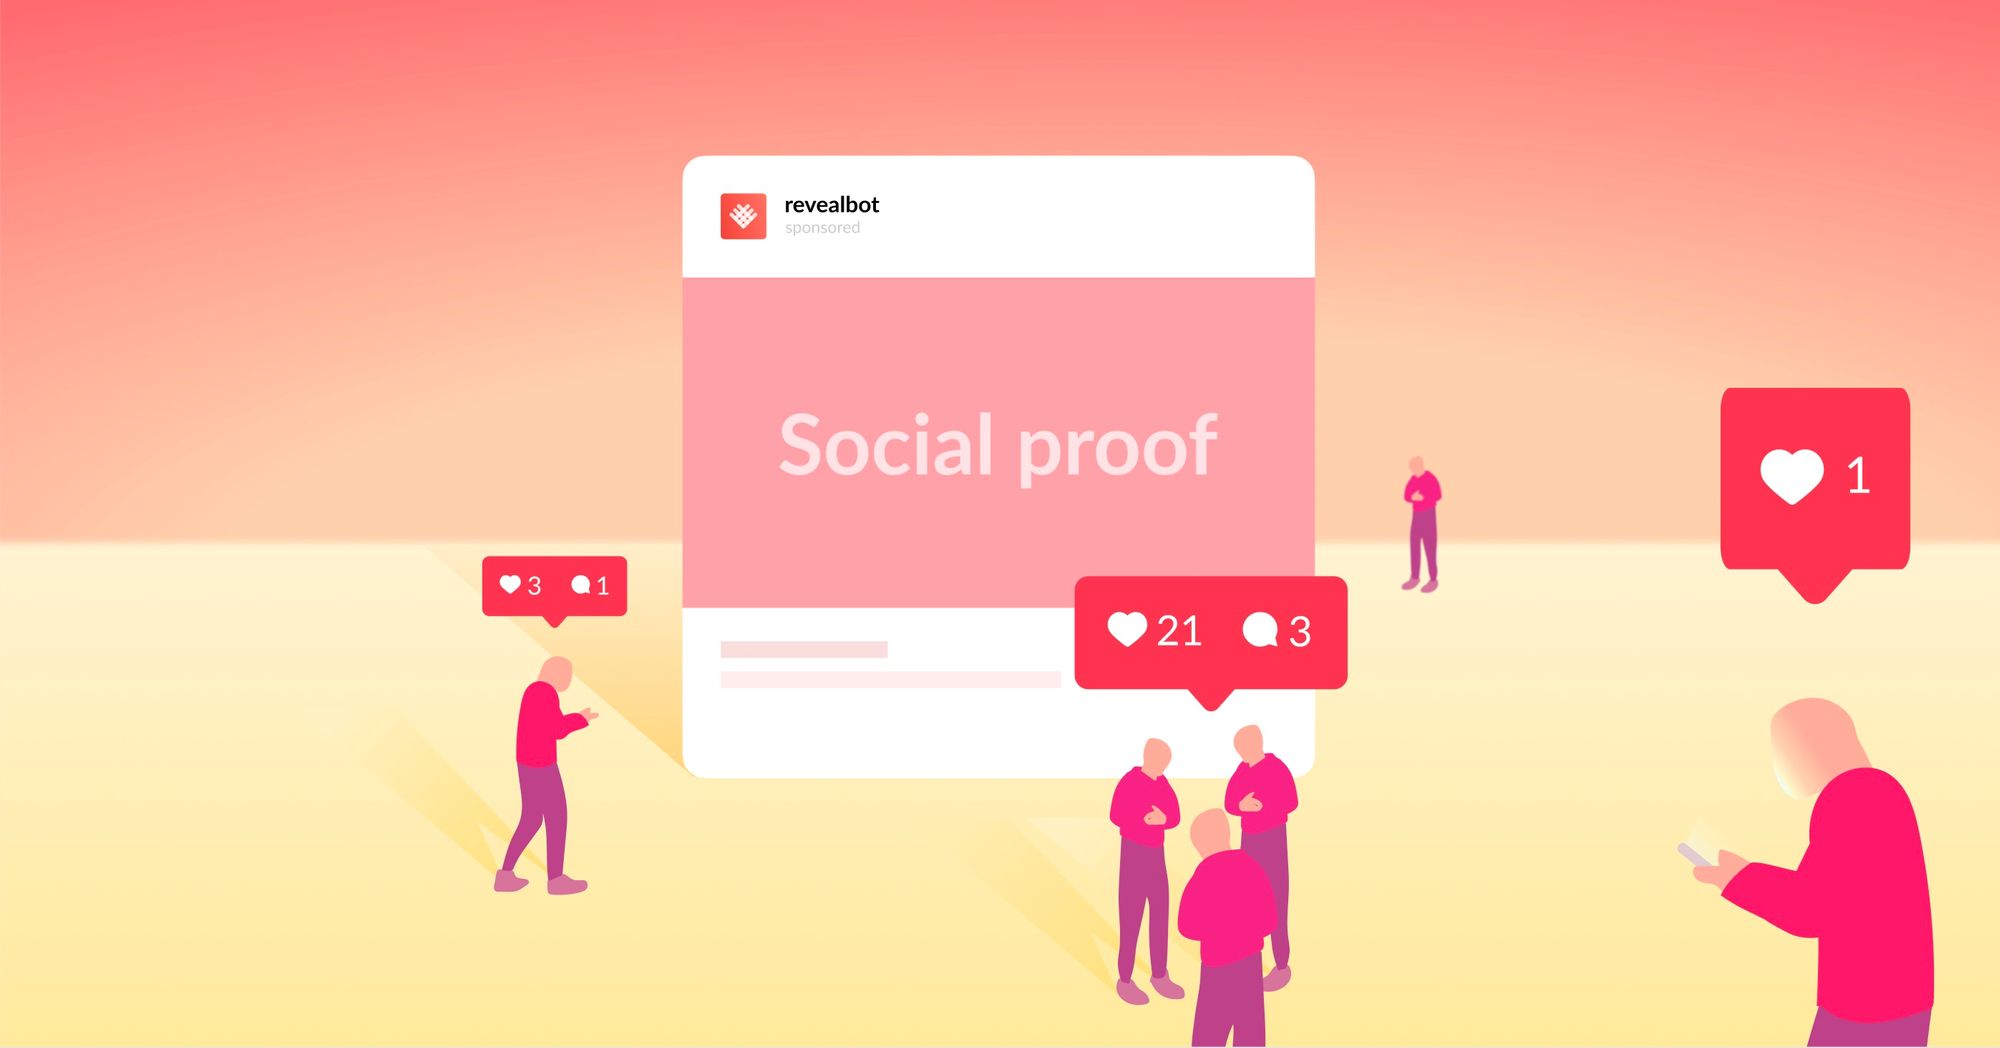 Social proof is best to convince customers